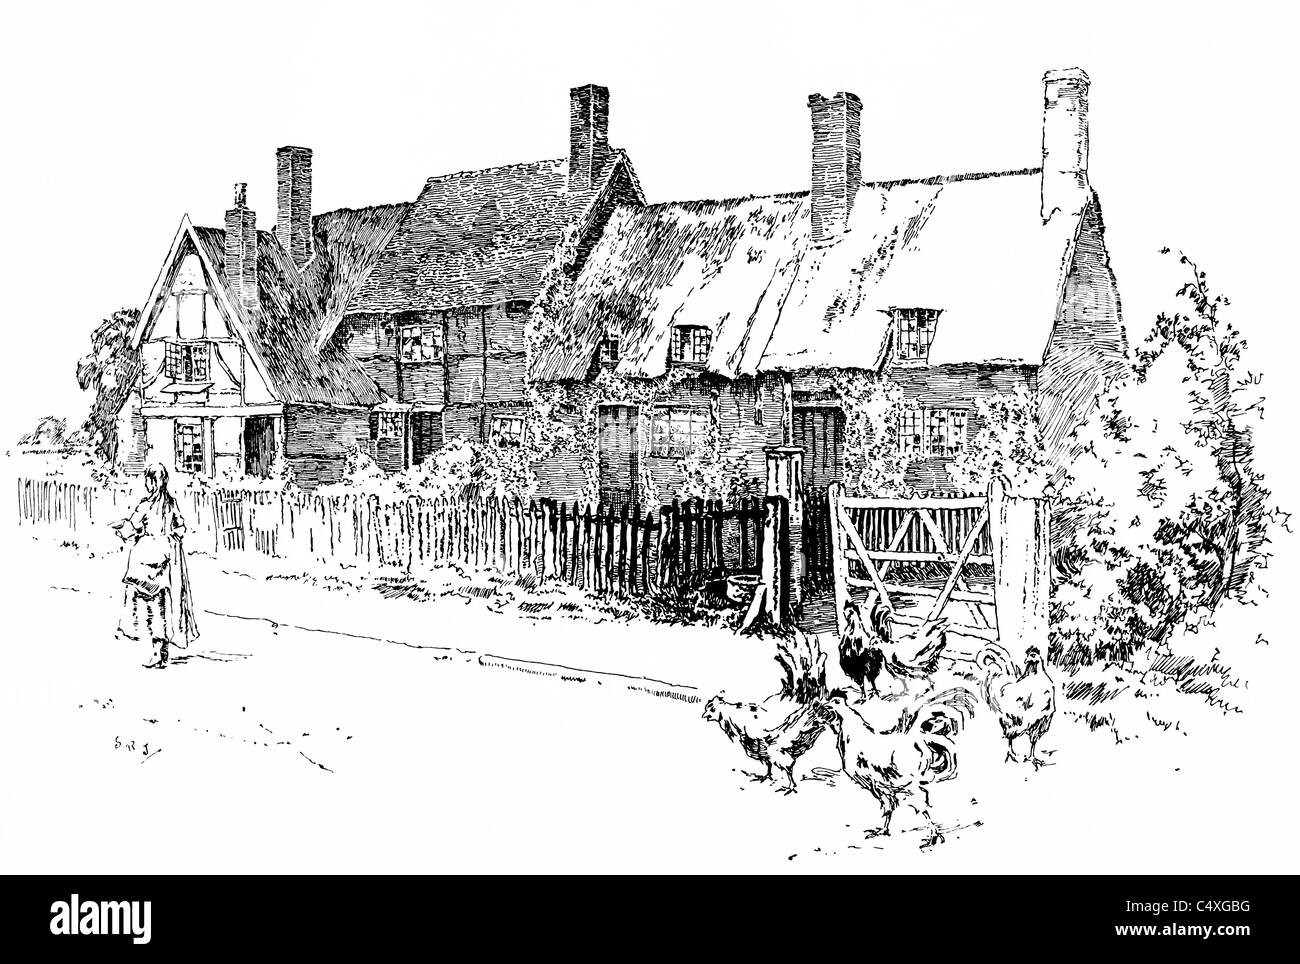 Hill Wootton, Warwickshire - pen and ink illustration from 'Old English Country Cottages' by Charles Holme, 1906. Stock Photo